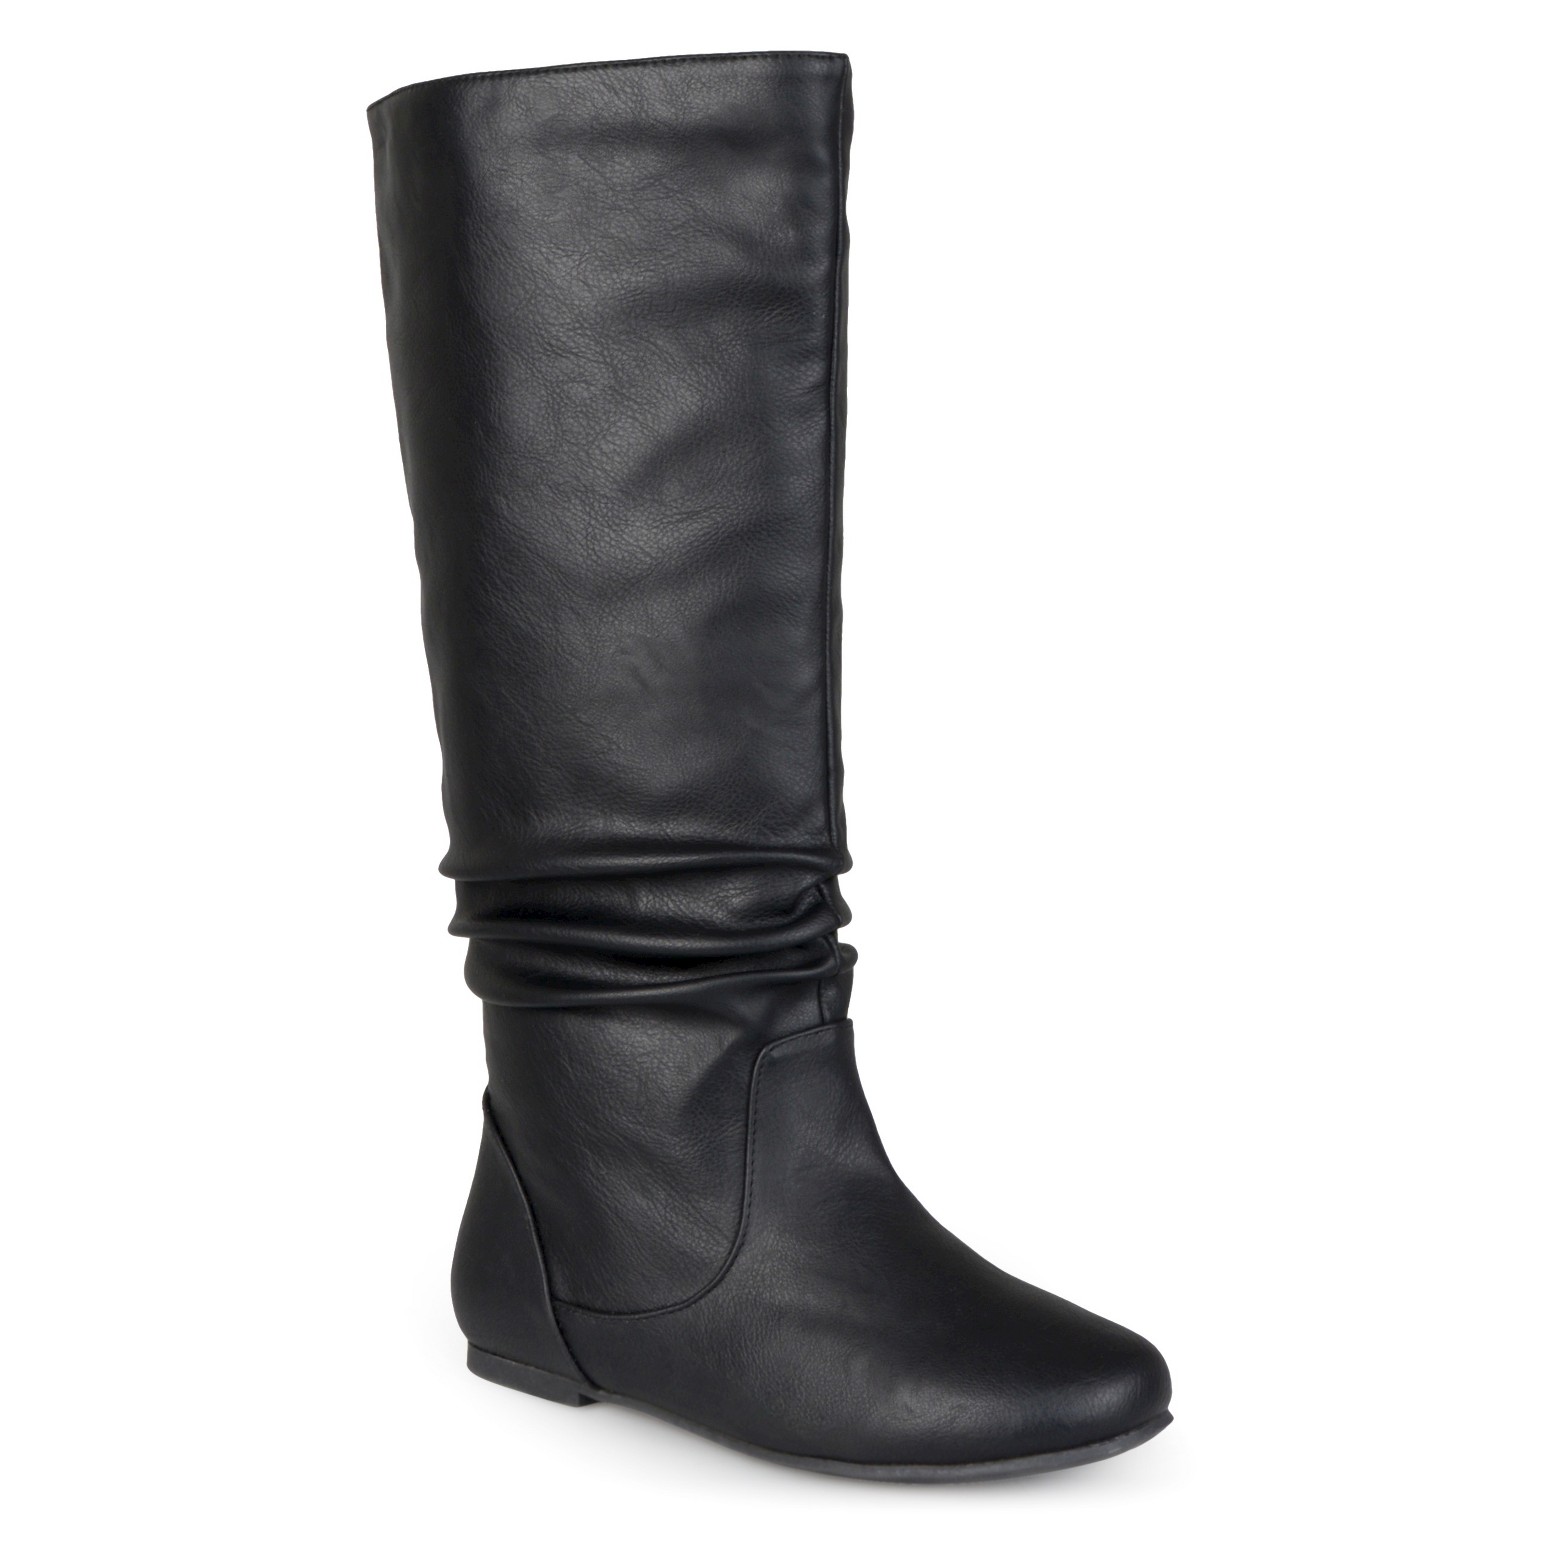 Target Deal - Save 20% on Women's Boots